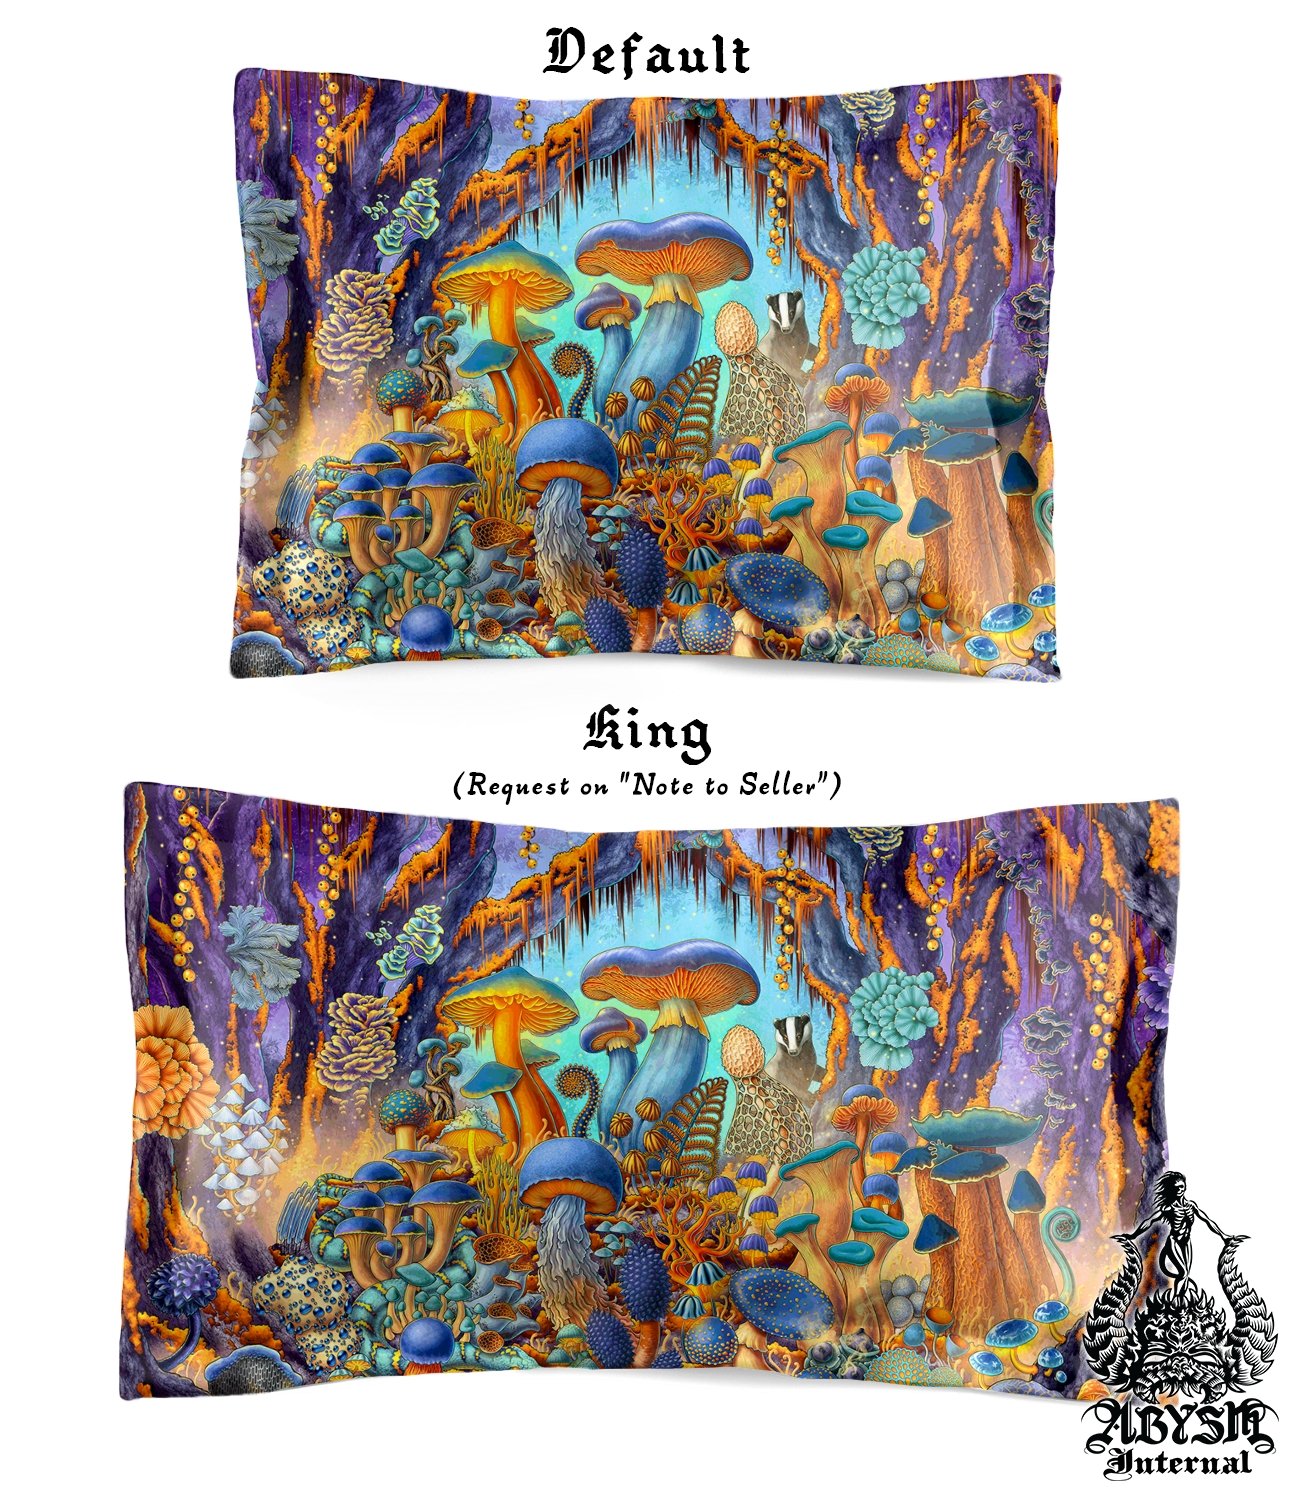 Mushrooms Bedding Set, Comforter and Duvet, Kids Fantasy Bed Cover, Bedroom Decor, King, Queen and Twin Size - Magic Shrooms, Cyan and Gold - Abysm Internal